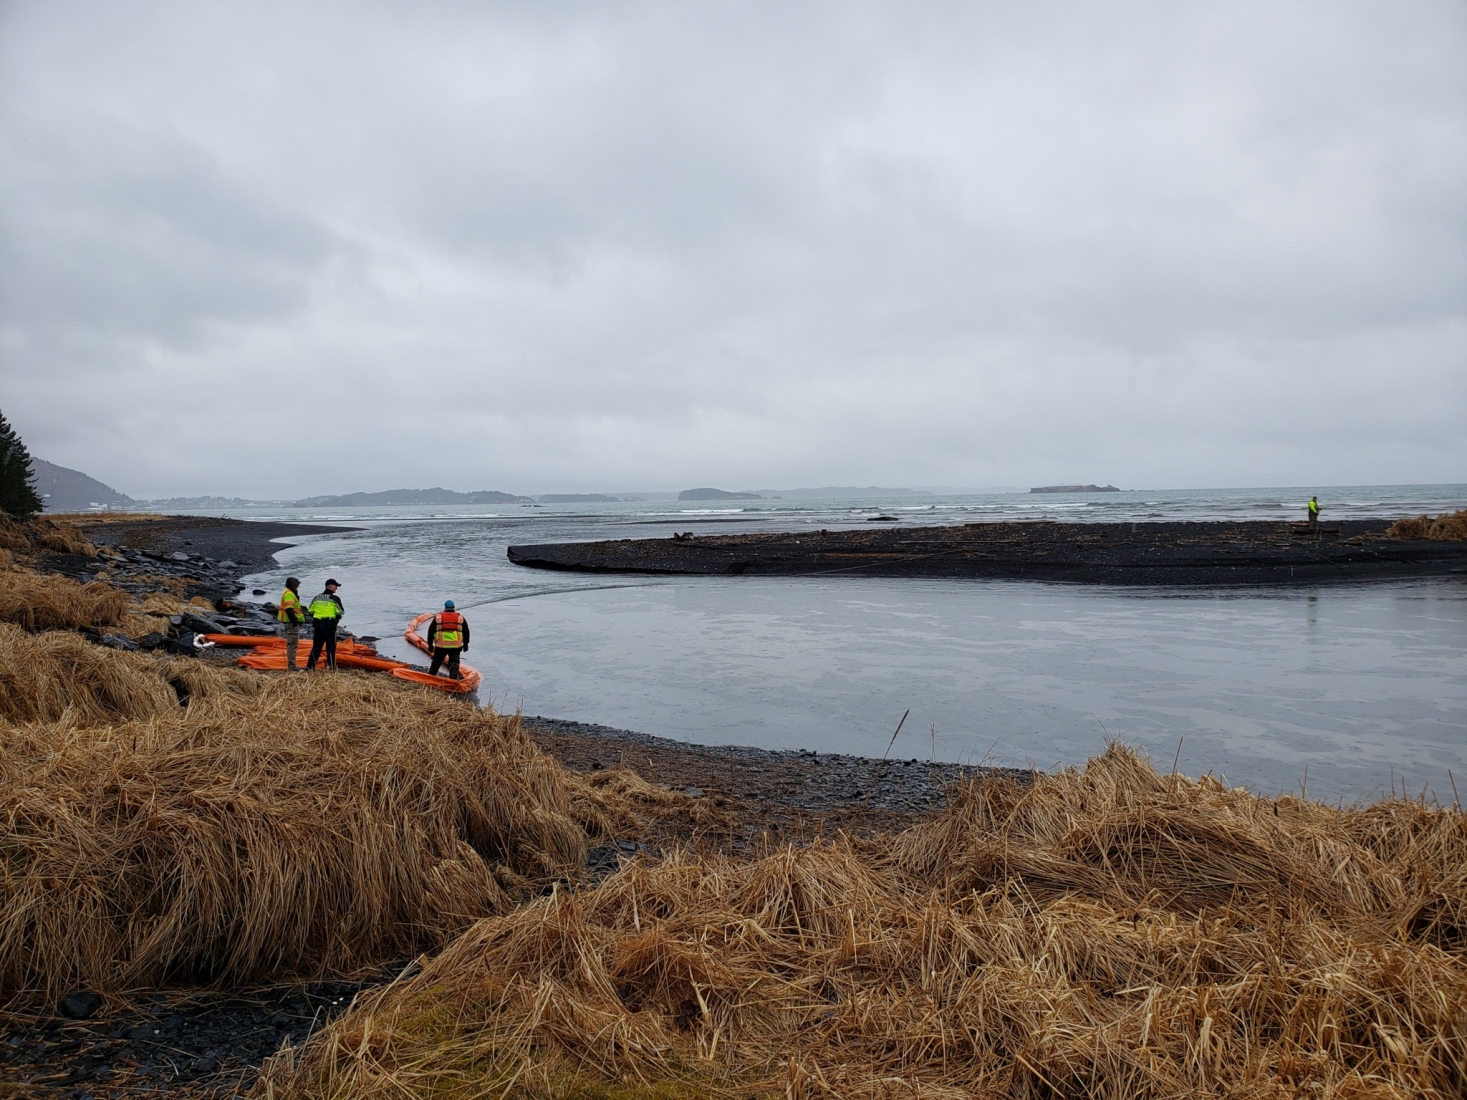 Response personnel on a shoreline near a body of water with visible oil sheen.